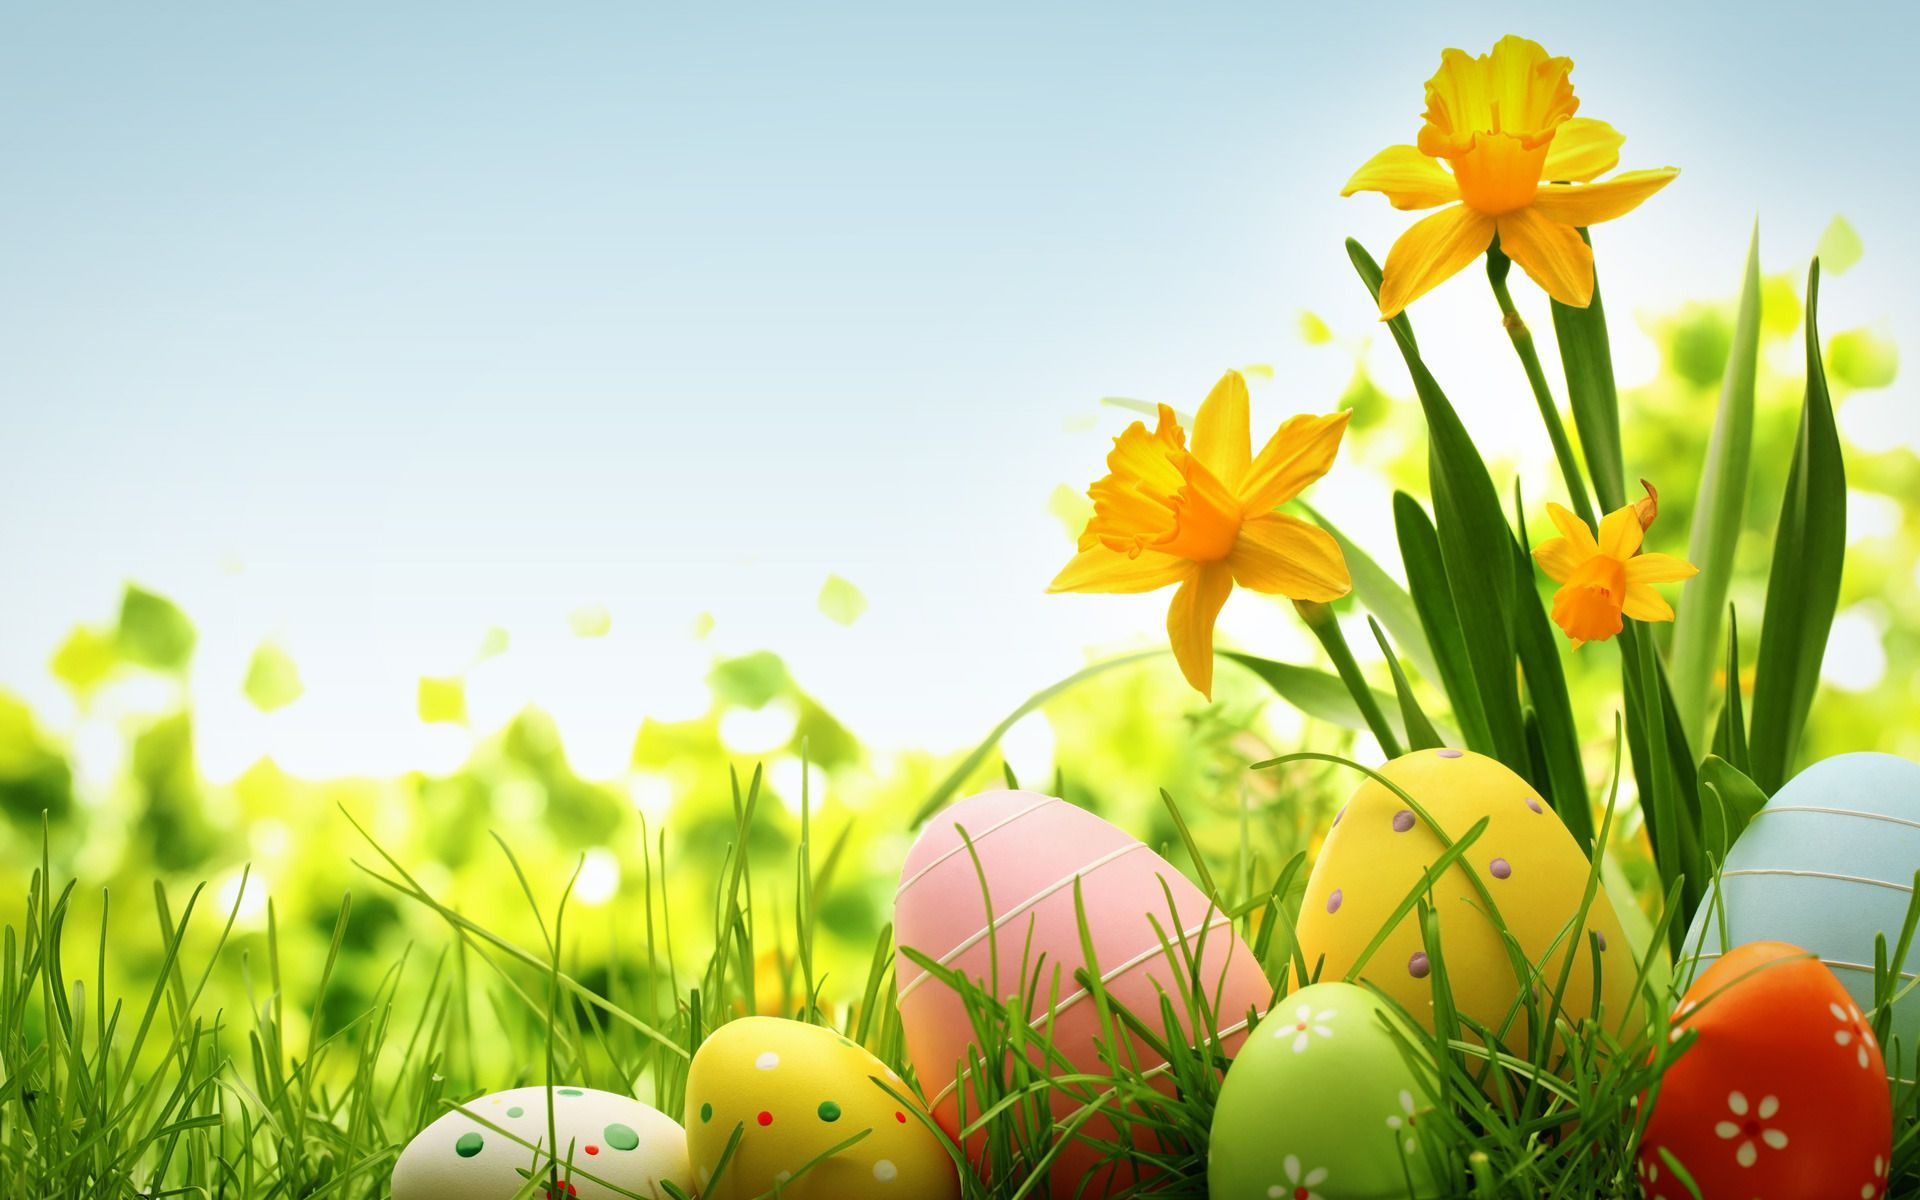 Easter Wallpaper HD download free Wallpapers, Backgrounds